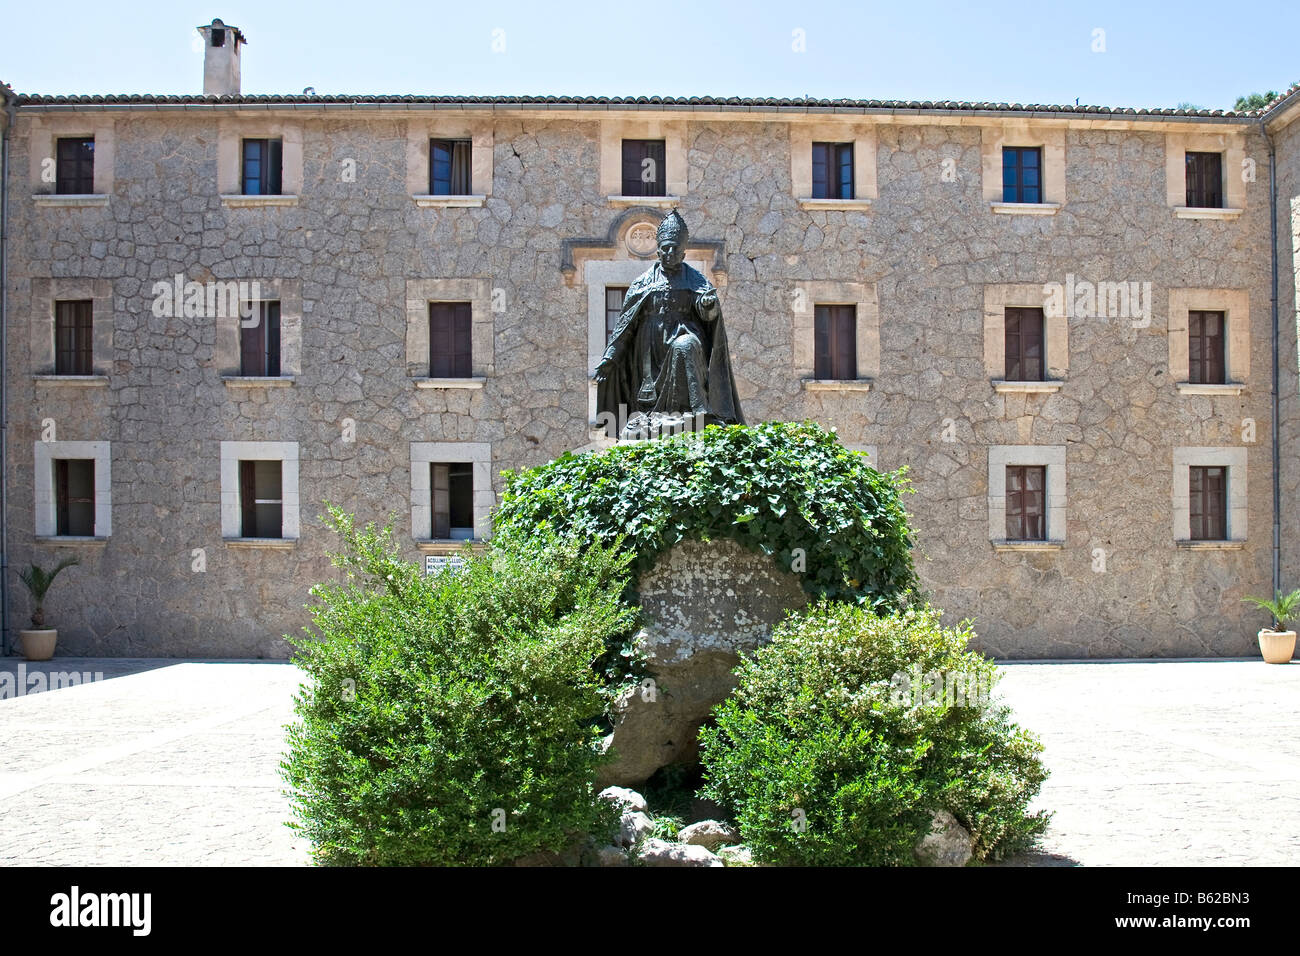 Memorial to the bishop Pere-Joan Campins in the cloistered courtyard of the Santuario de lluc Monastery, county of Escorca in t Stock Photo